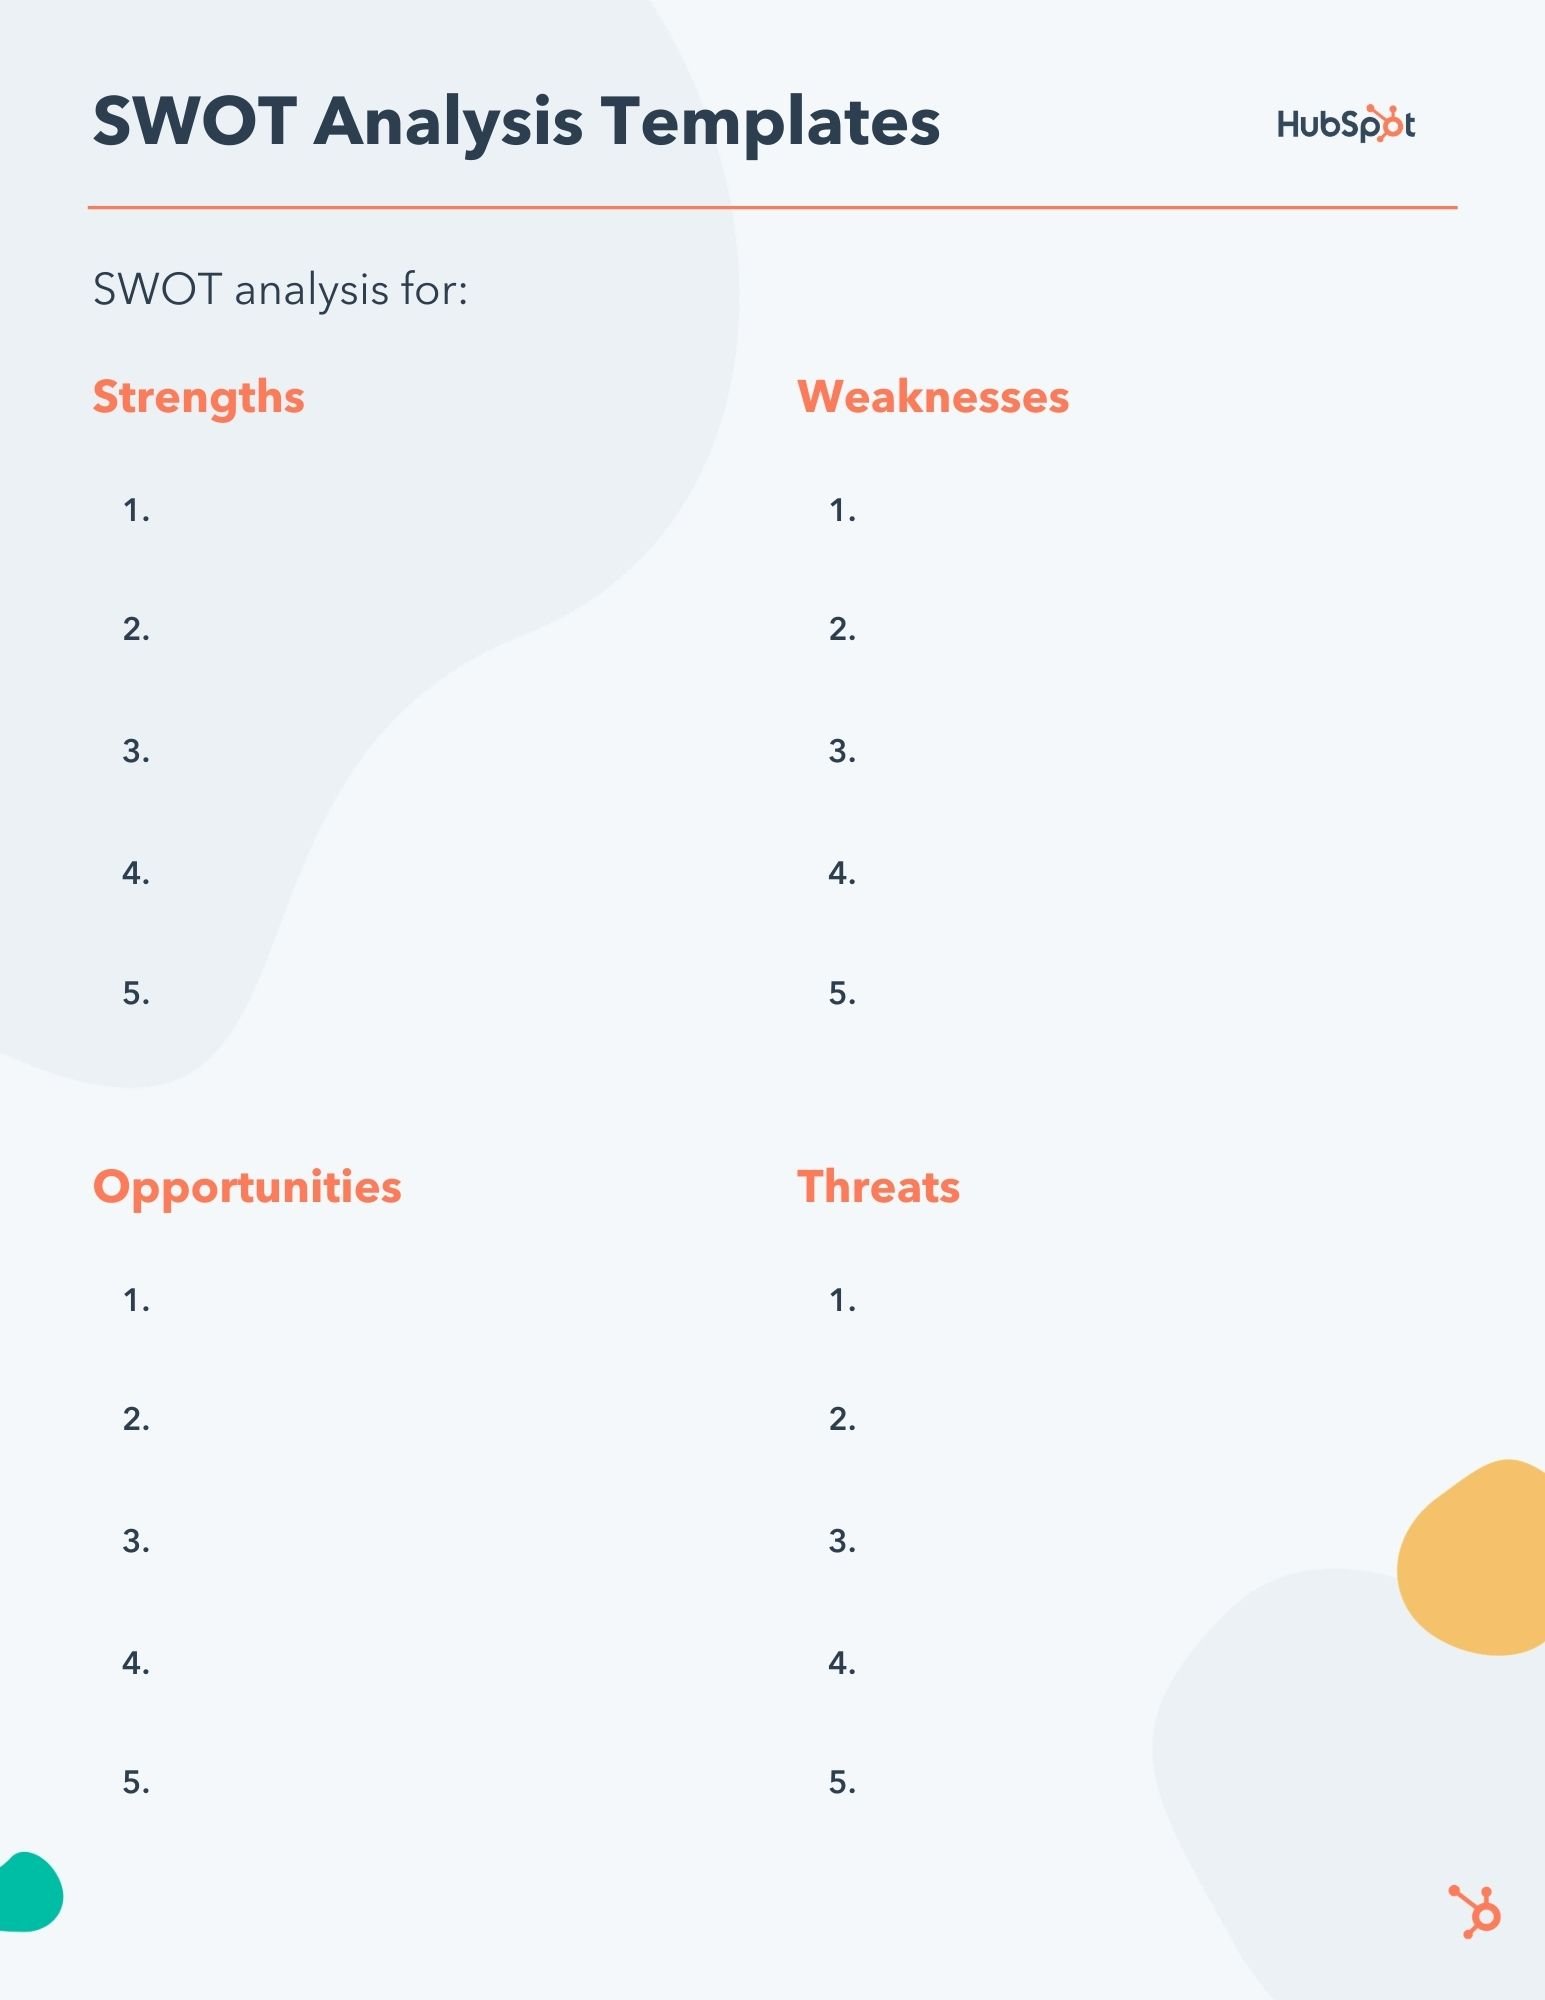 swot analysis is a strategic planning technique that provides assessment tools